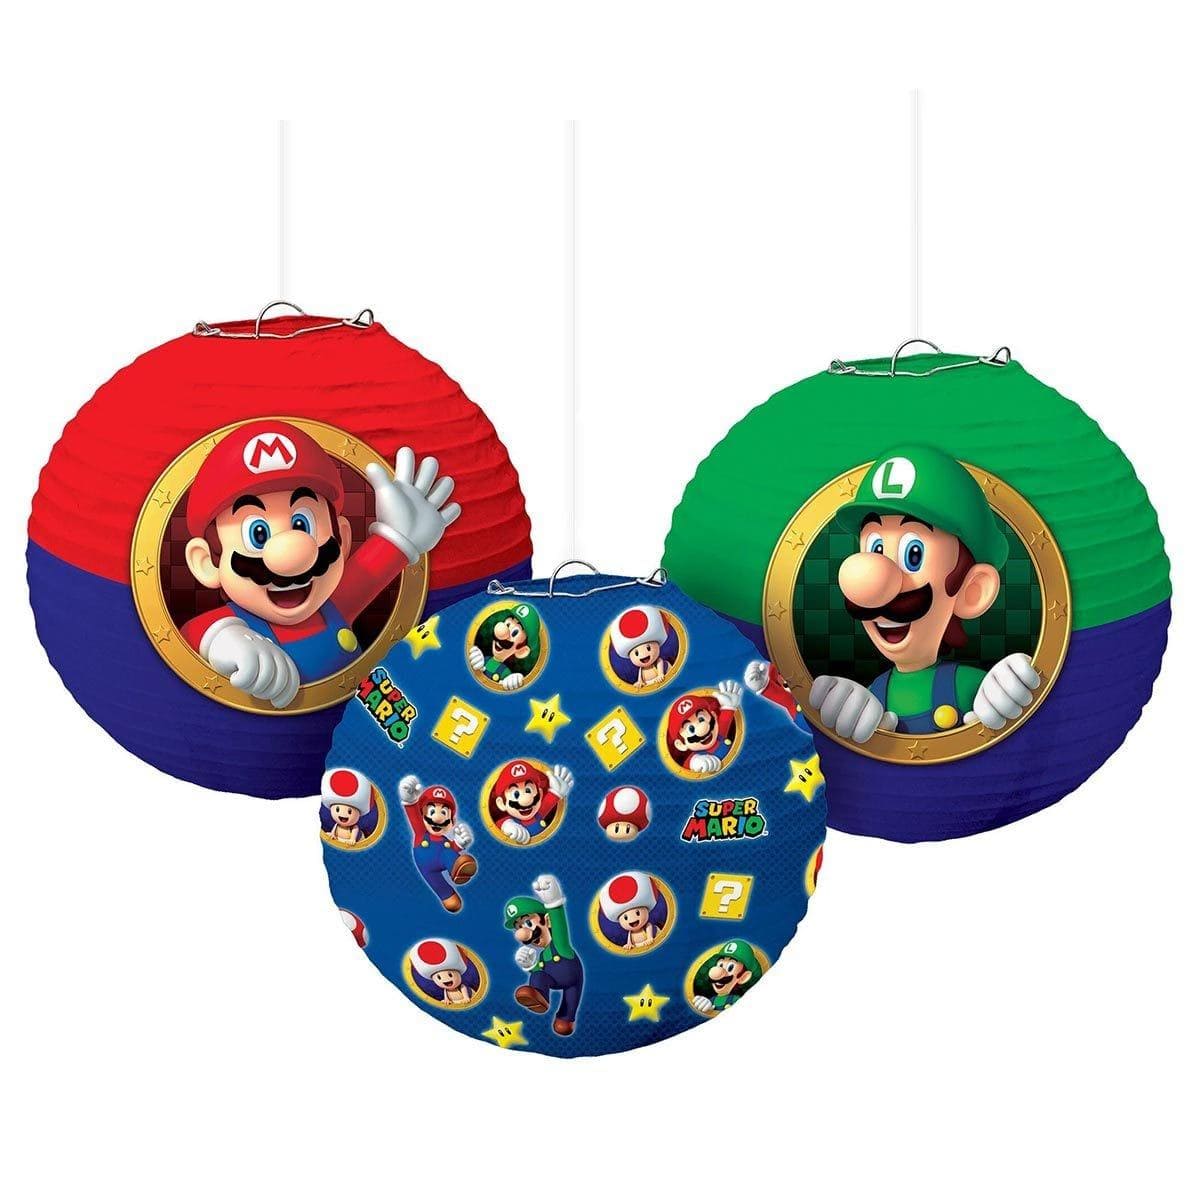 Buy Kids Birthday Super Mario Paper Lanterns kit, 3 Count sold at Party Expert